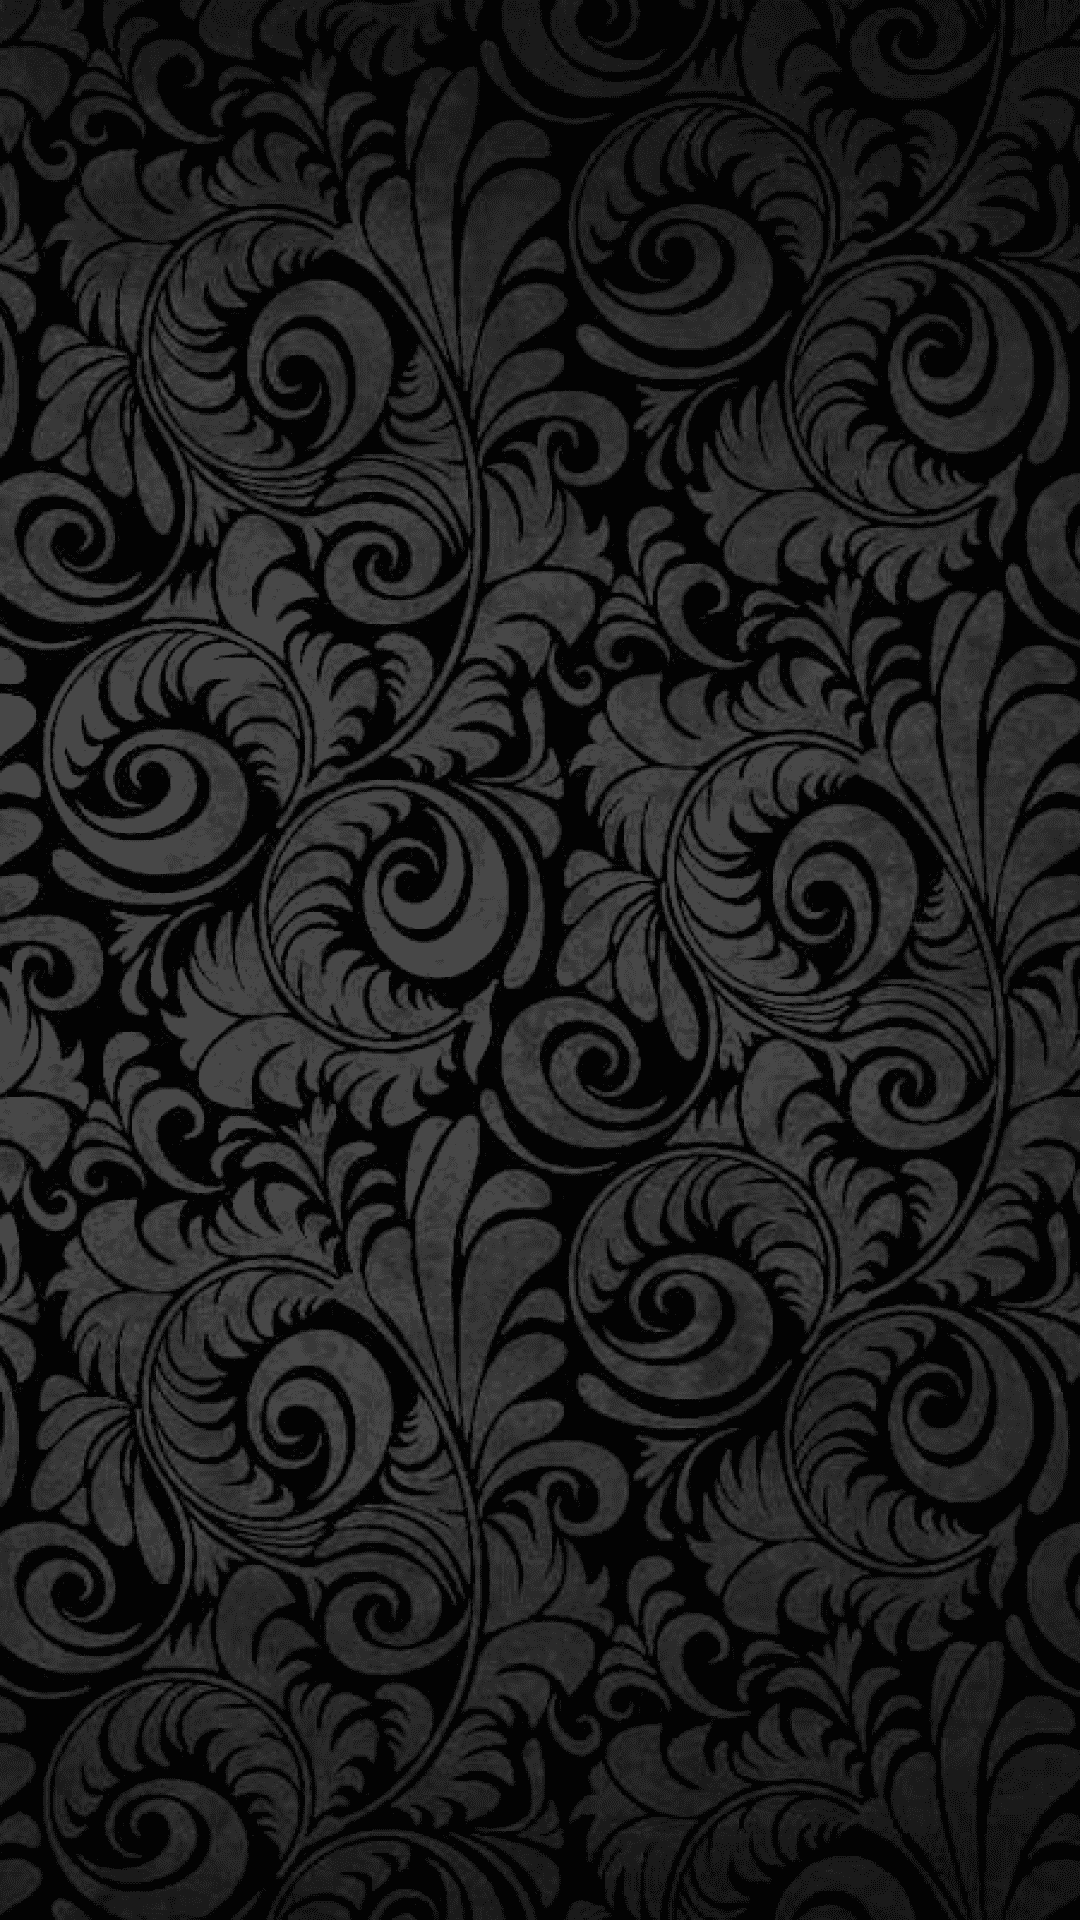 50 Black Wallpaper In FHD For Free Download For Android, Des